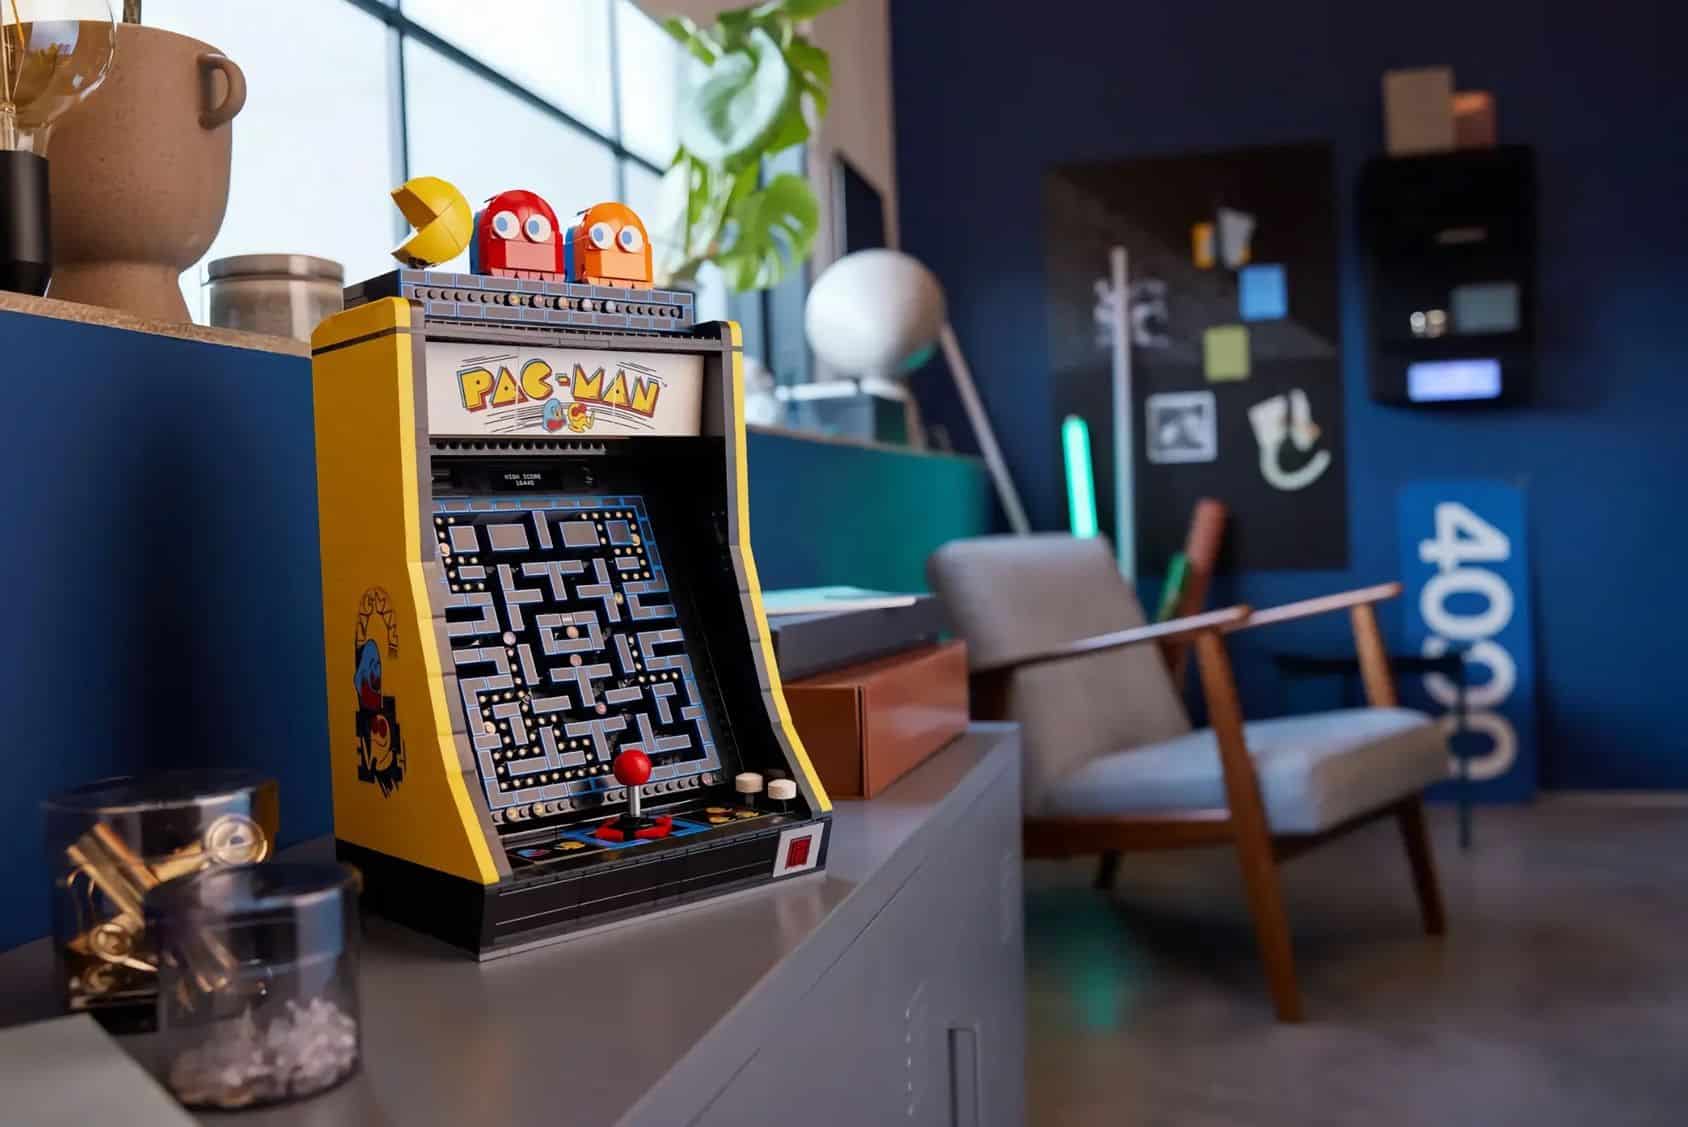 Lego releases arcade game with Pac-Man